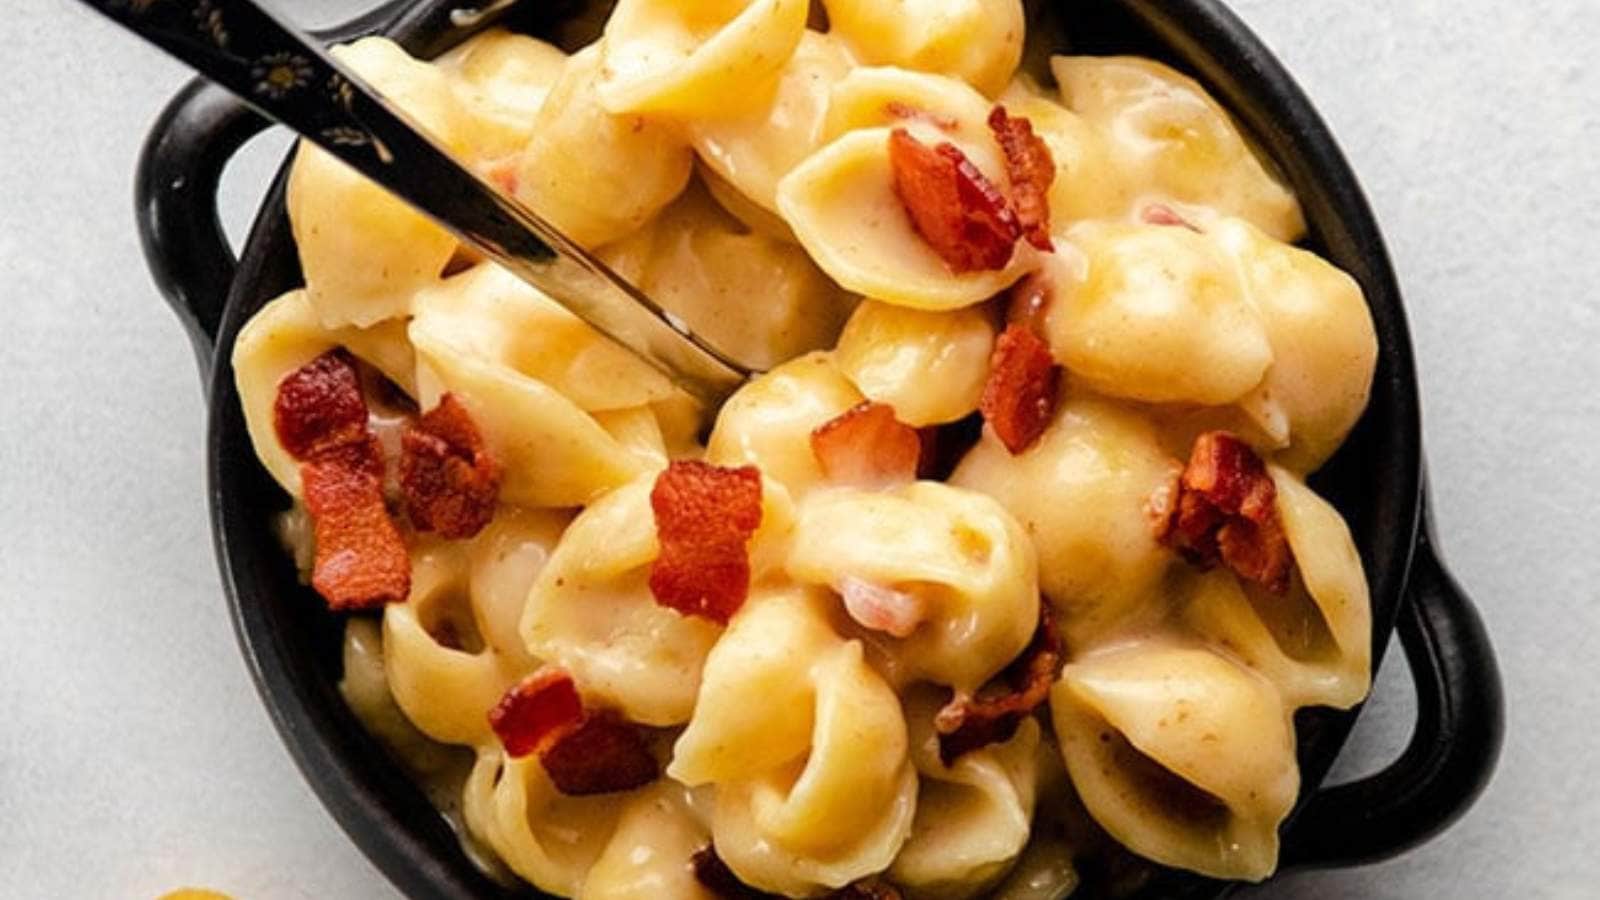 Apple Cider Mac And Cheese With Crispy Bacon recipe by Life As A Strawberry.